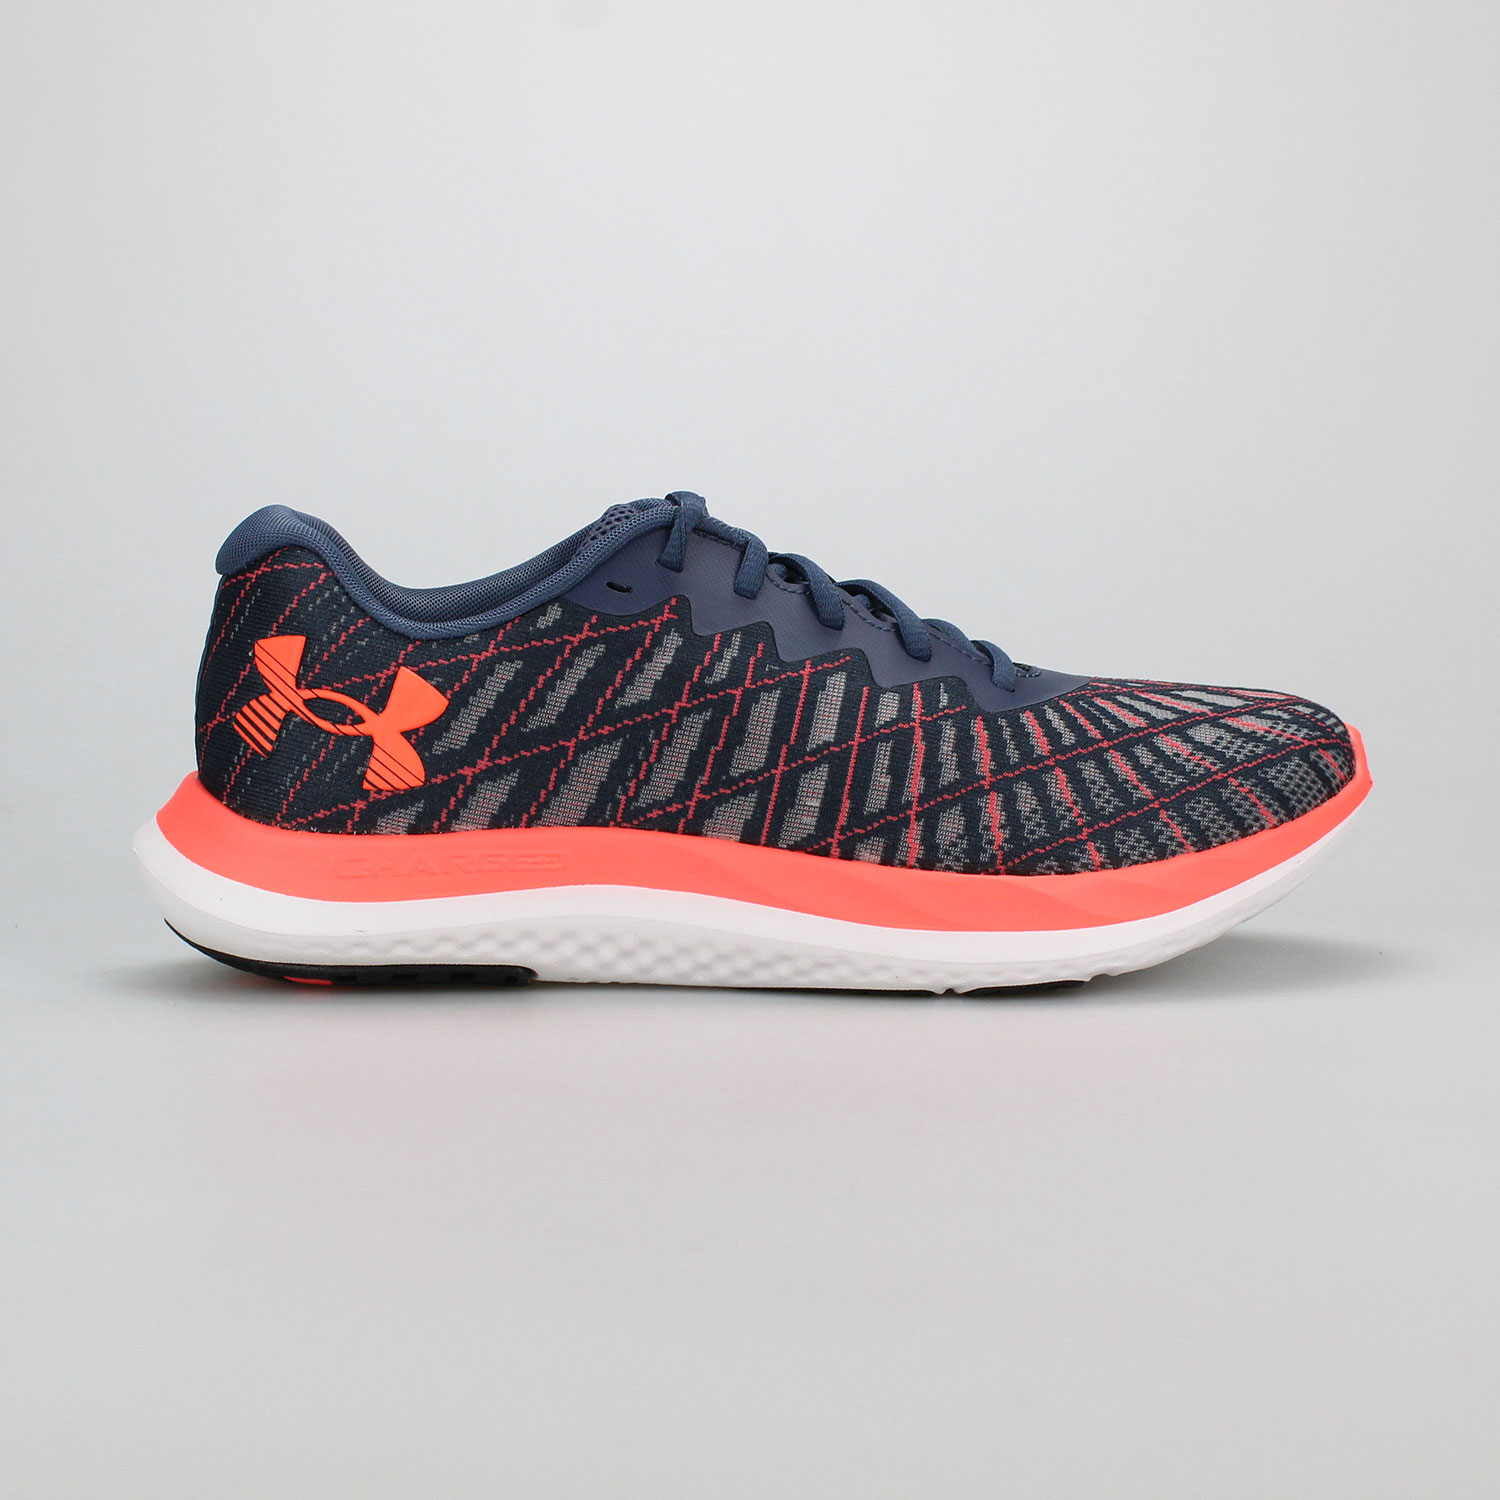 UNDER ARMOUR CHARGED BREEZE 2 ΓΚΡΙ ΑΝΔΡΙΚΑ ΡΟΥΧΑ ΚΑΙ ΠΑΠΟΥΤΣΙΑ > ΑΝΔΡΙΚΑ ΠΑΠΟΥΤΣΙΑ > ΤΡΕΞΙΜΟ